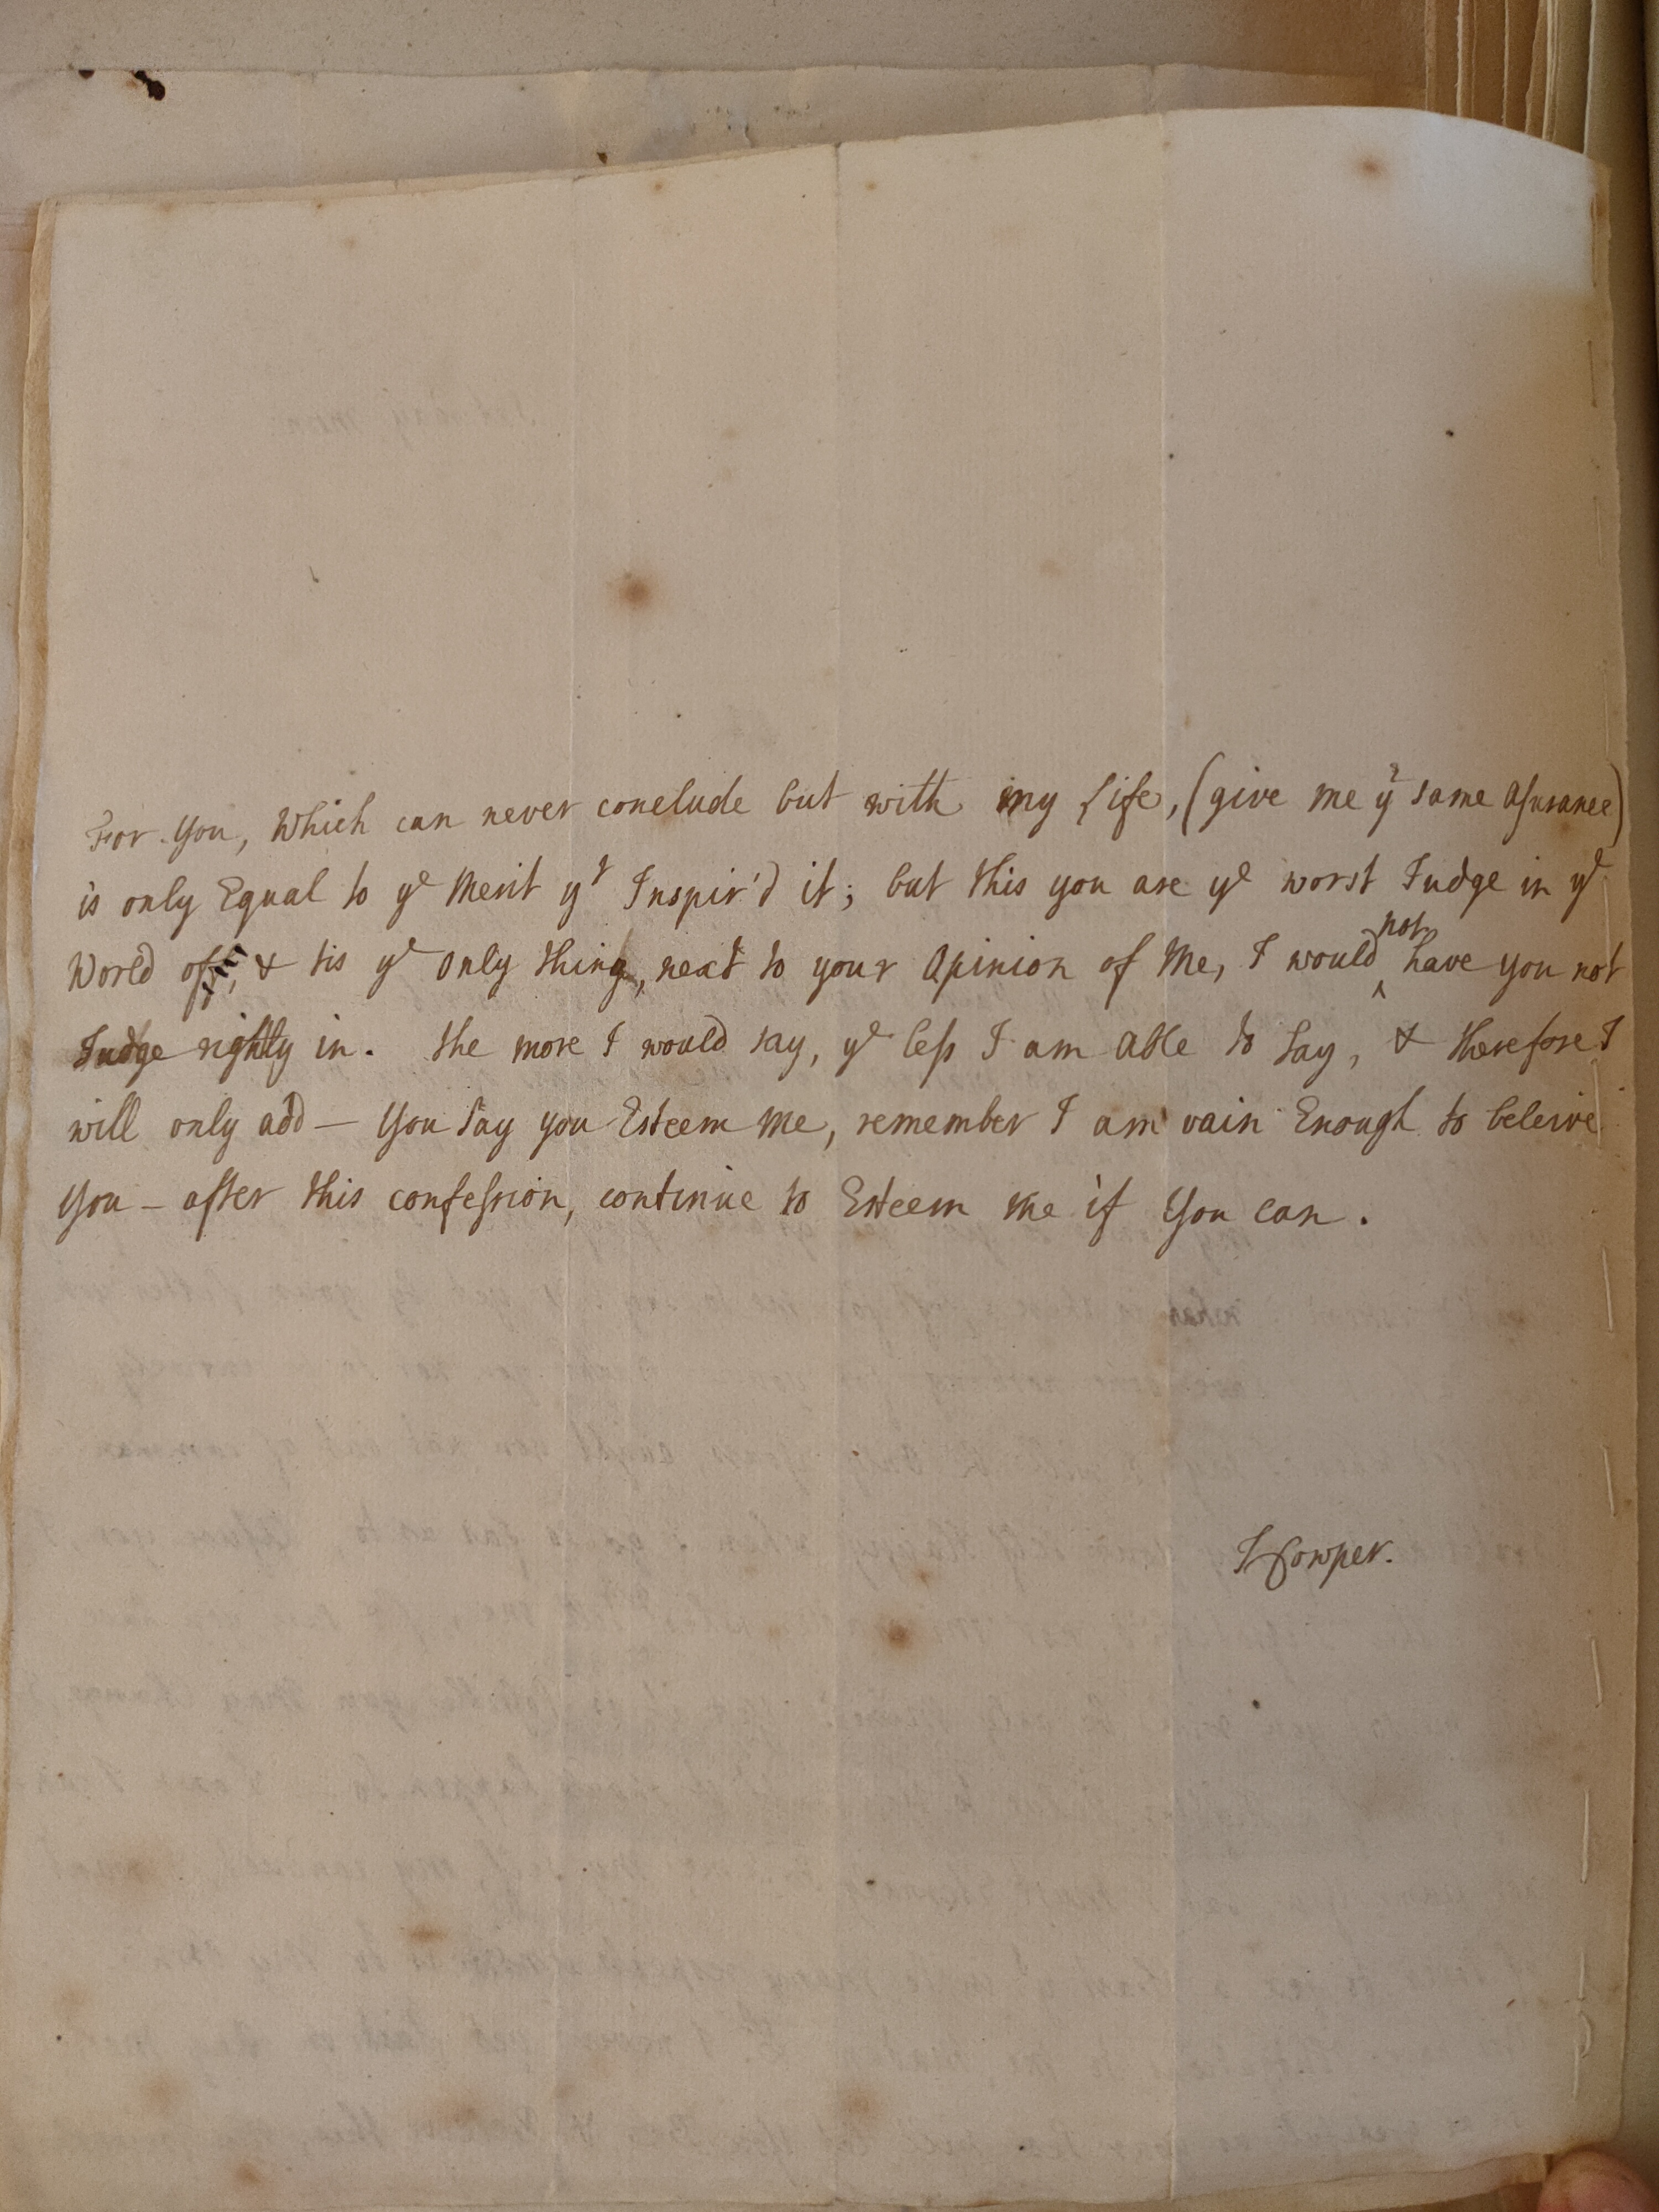 Image #2 of letter: Judith Cowper to Martin Madan, 1723